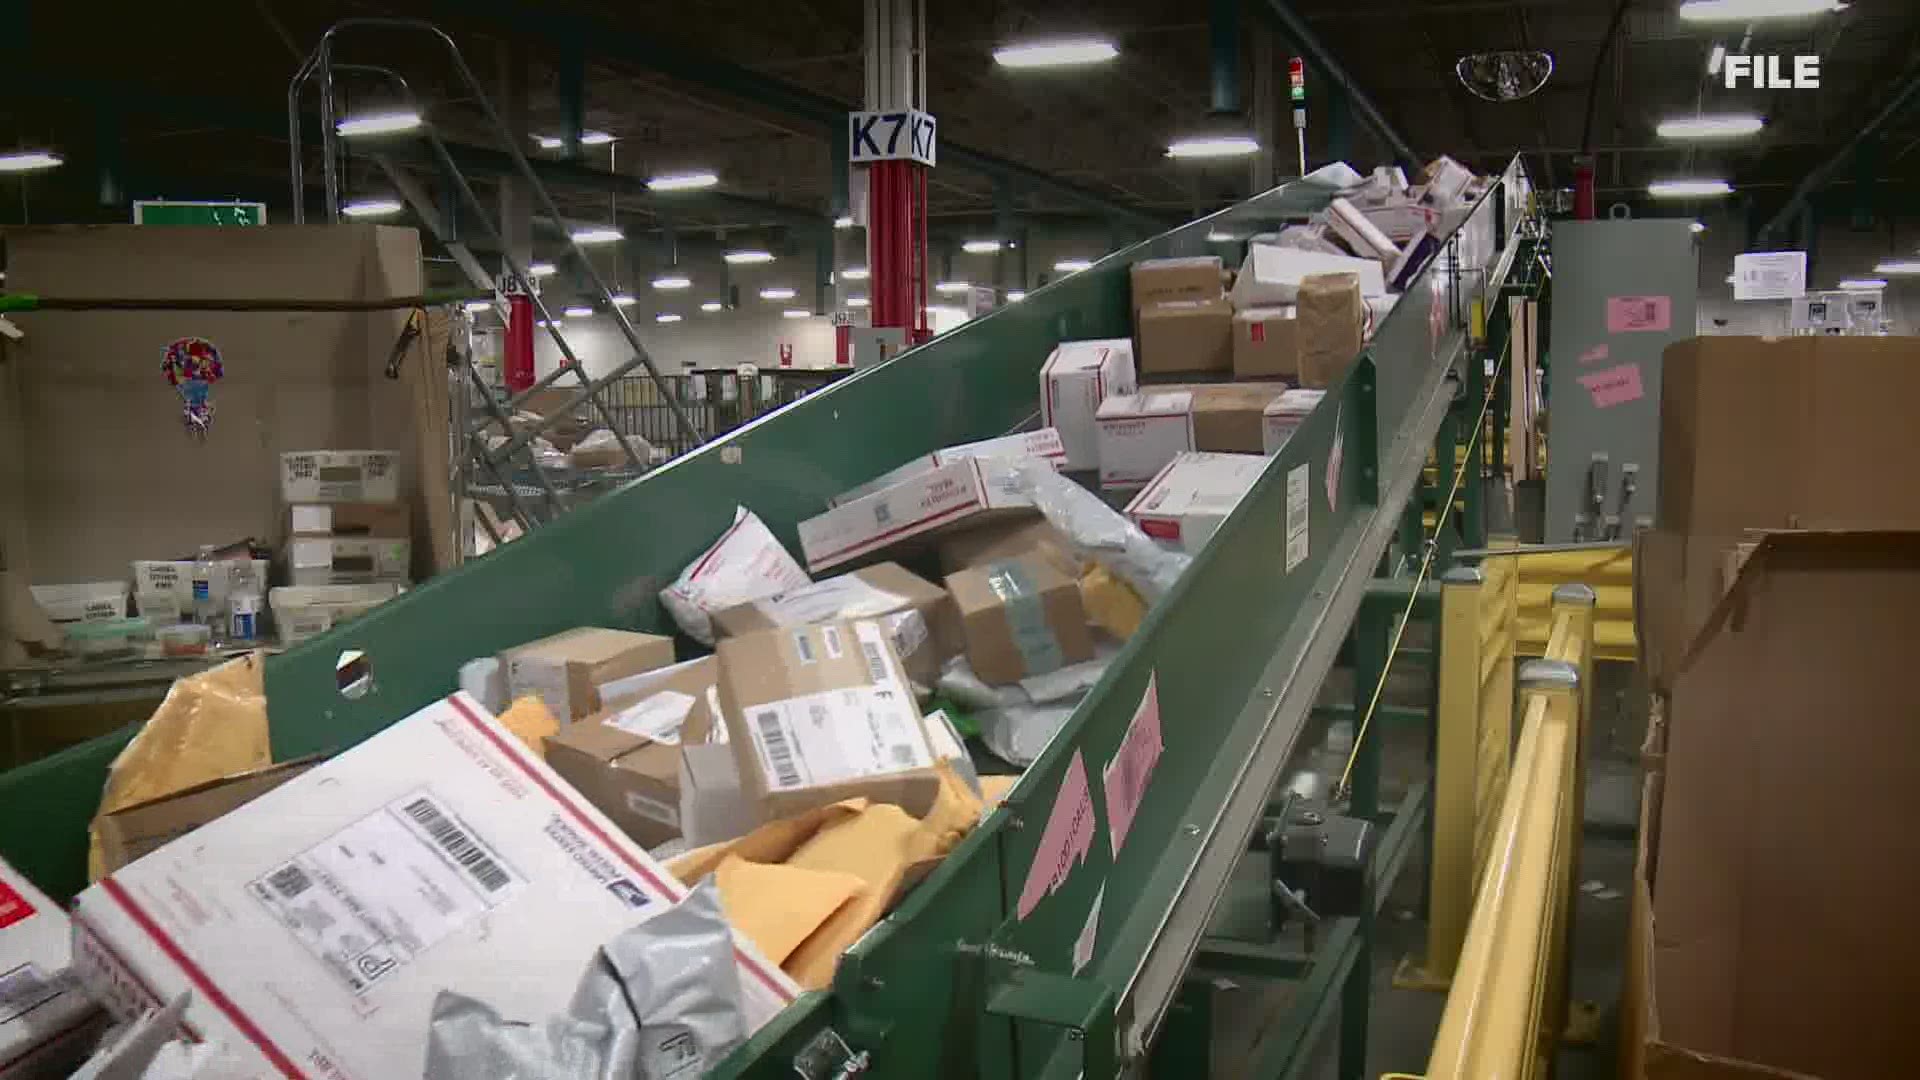 USPS says that it is feeling the affects of the pandemic this holiday season, with online orders higher than previous years, and reduced staffing due to Covid-19.